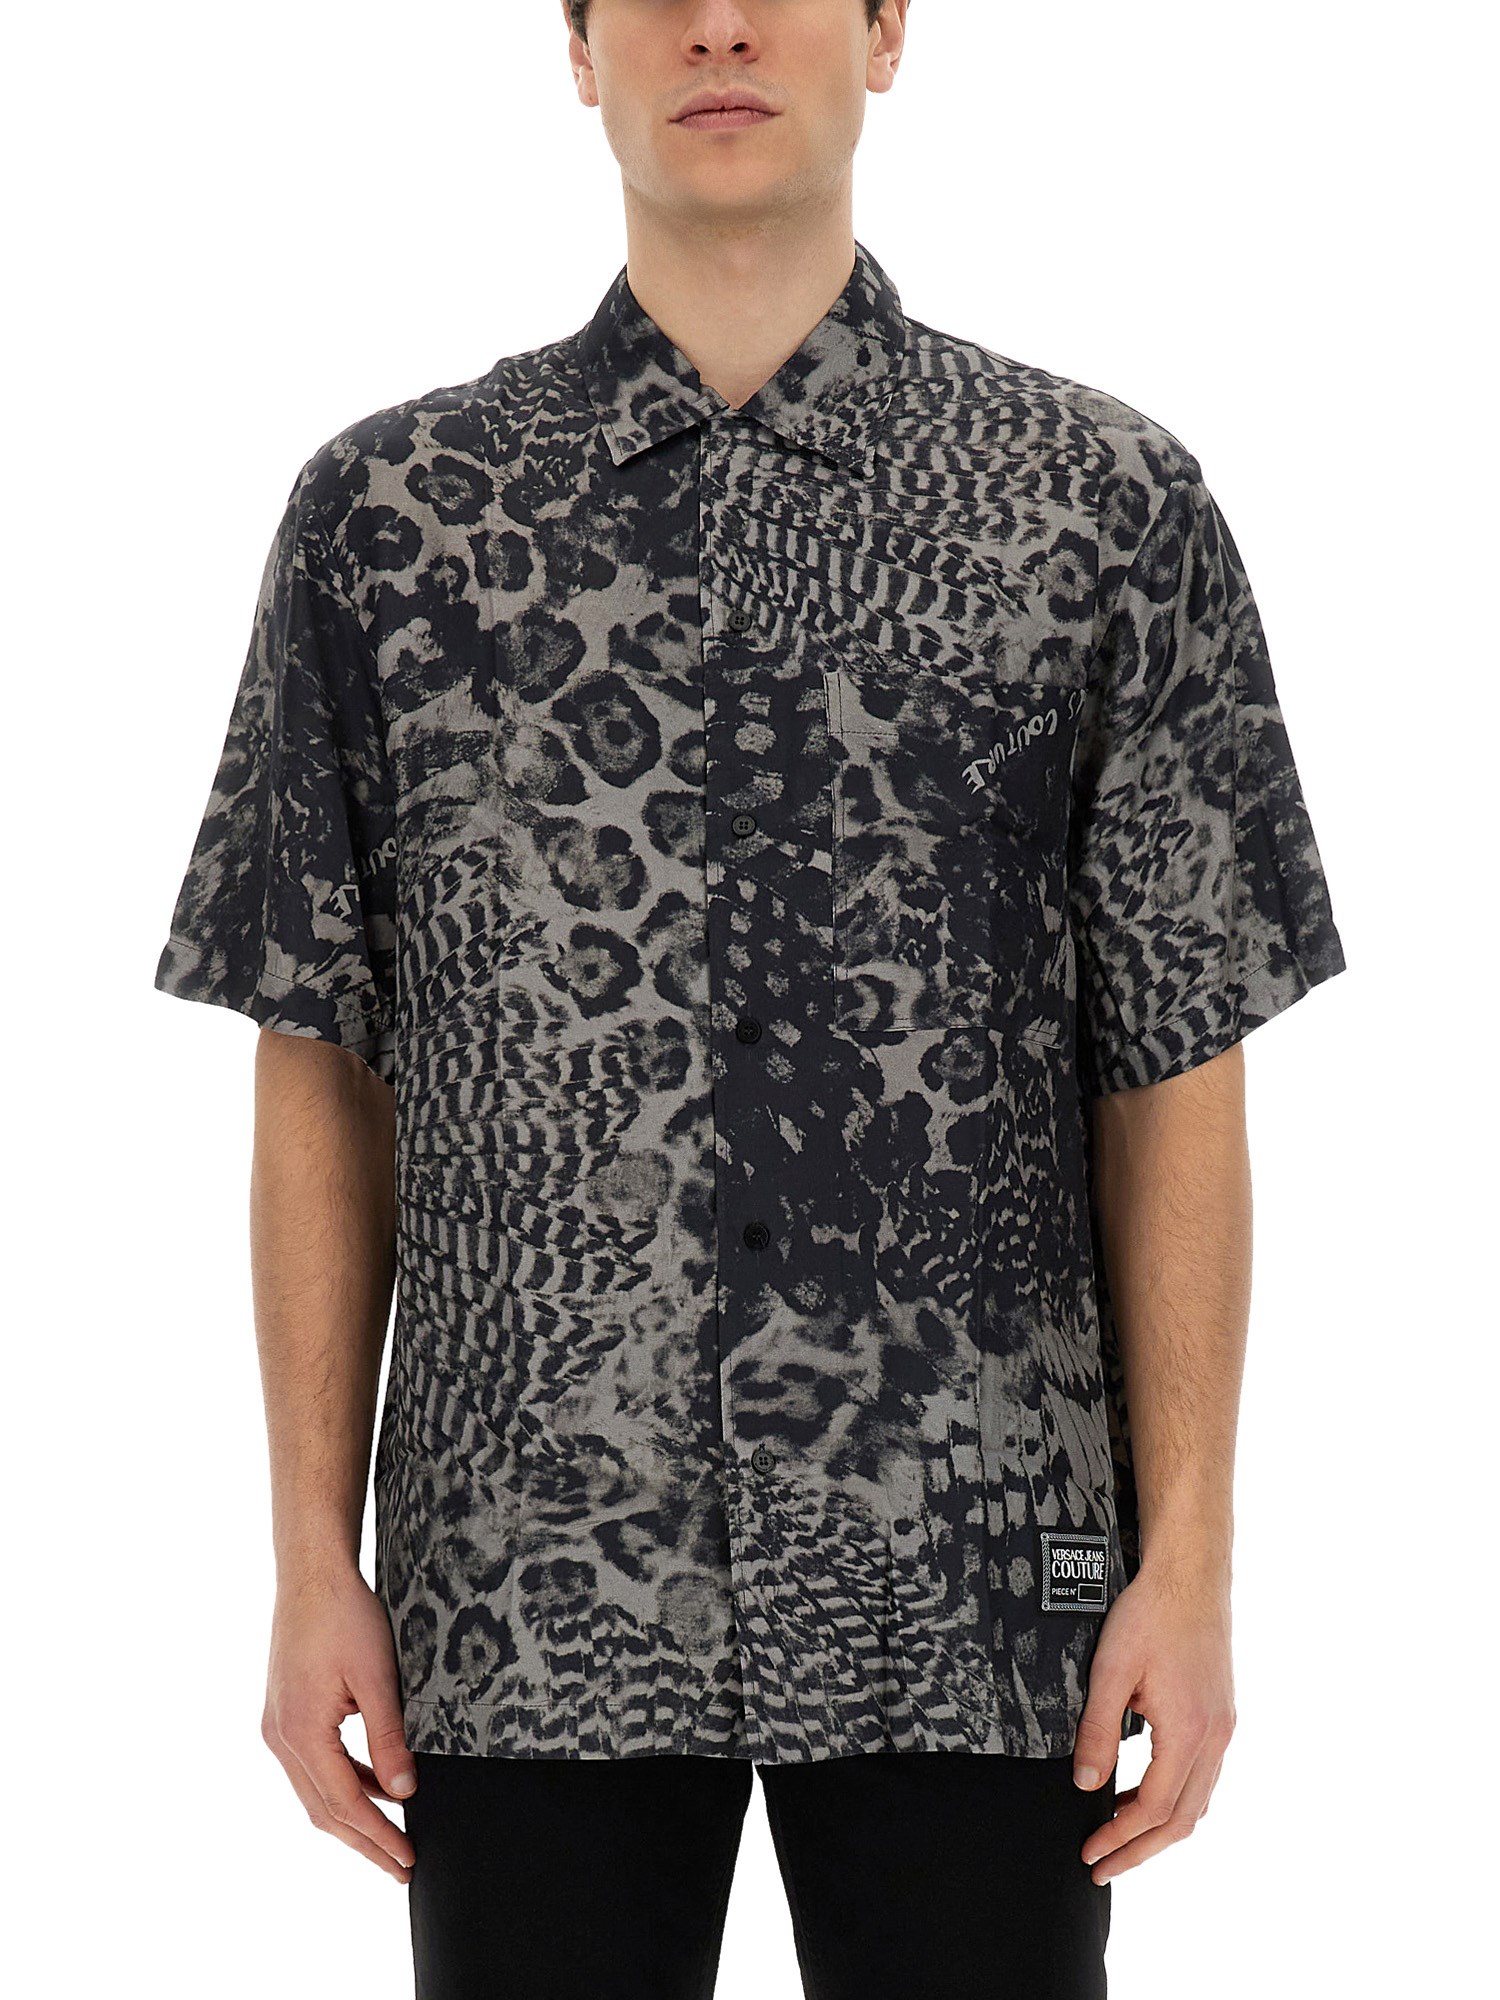 Versace Jeans Couture Printed Shirt In Black